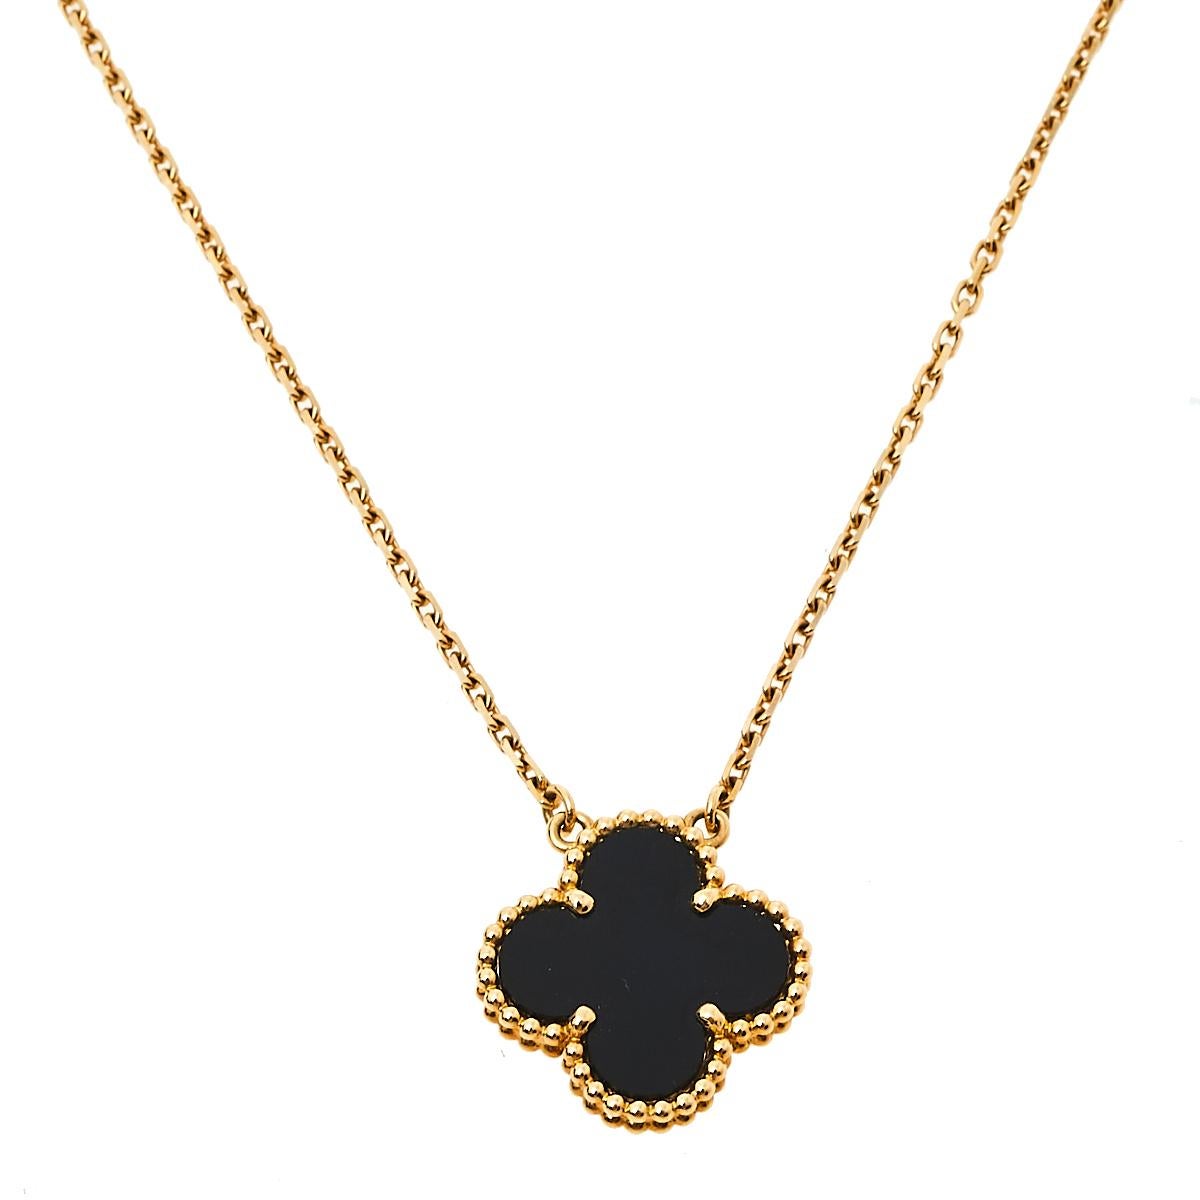 Van Cleef & Arpels’ Alhambra jewel was first created in 1968, and the Vintage Alhambra creations remain faithful to its timeless elegance. The iconic clover motif is a potent symbol of luck and in this necklace, it comes set with onyx and is adorned